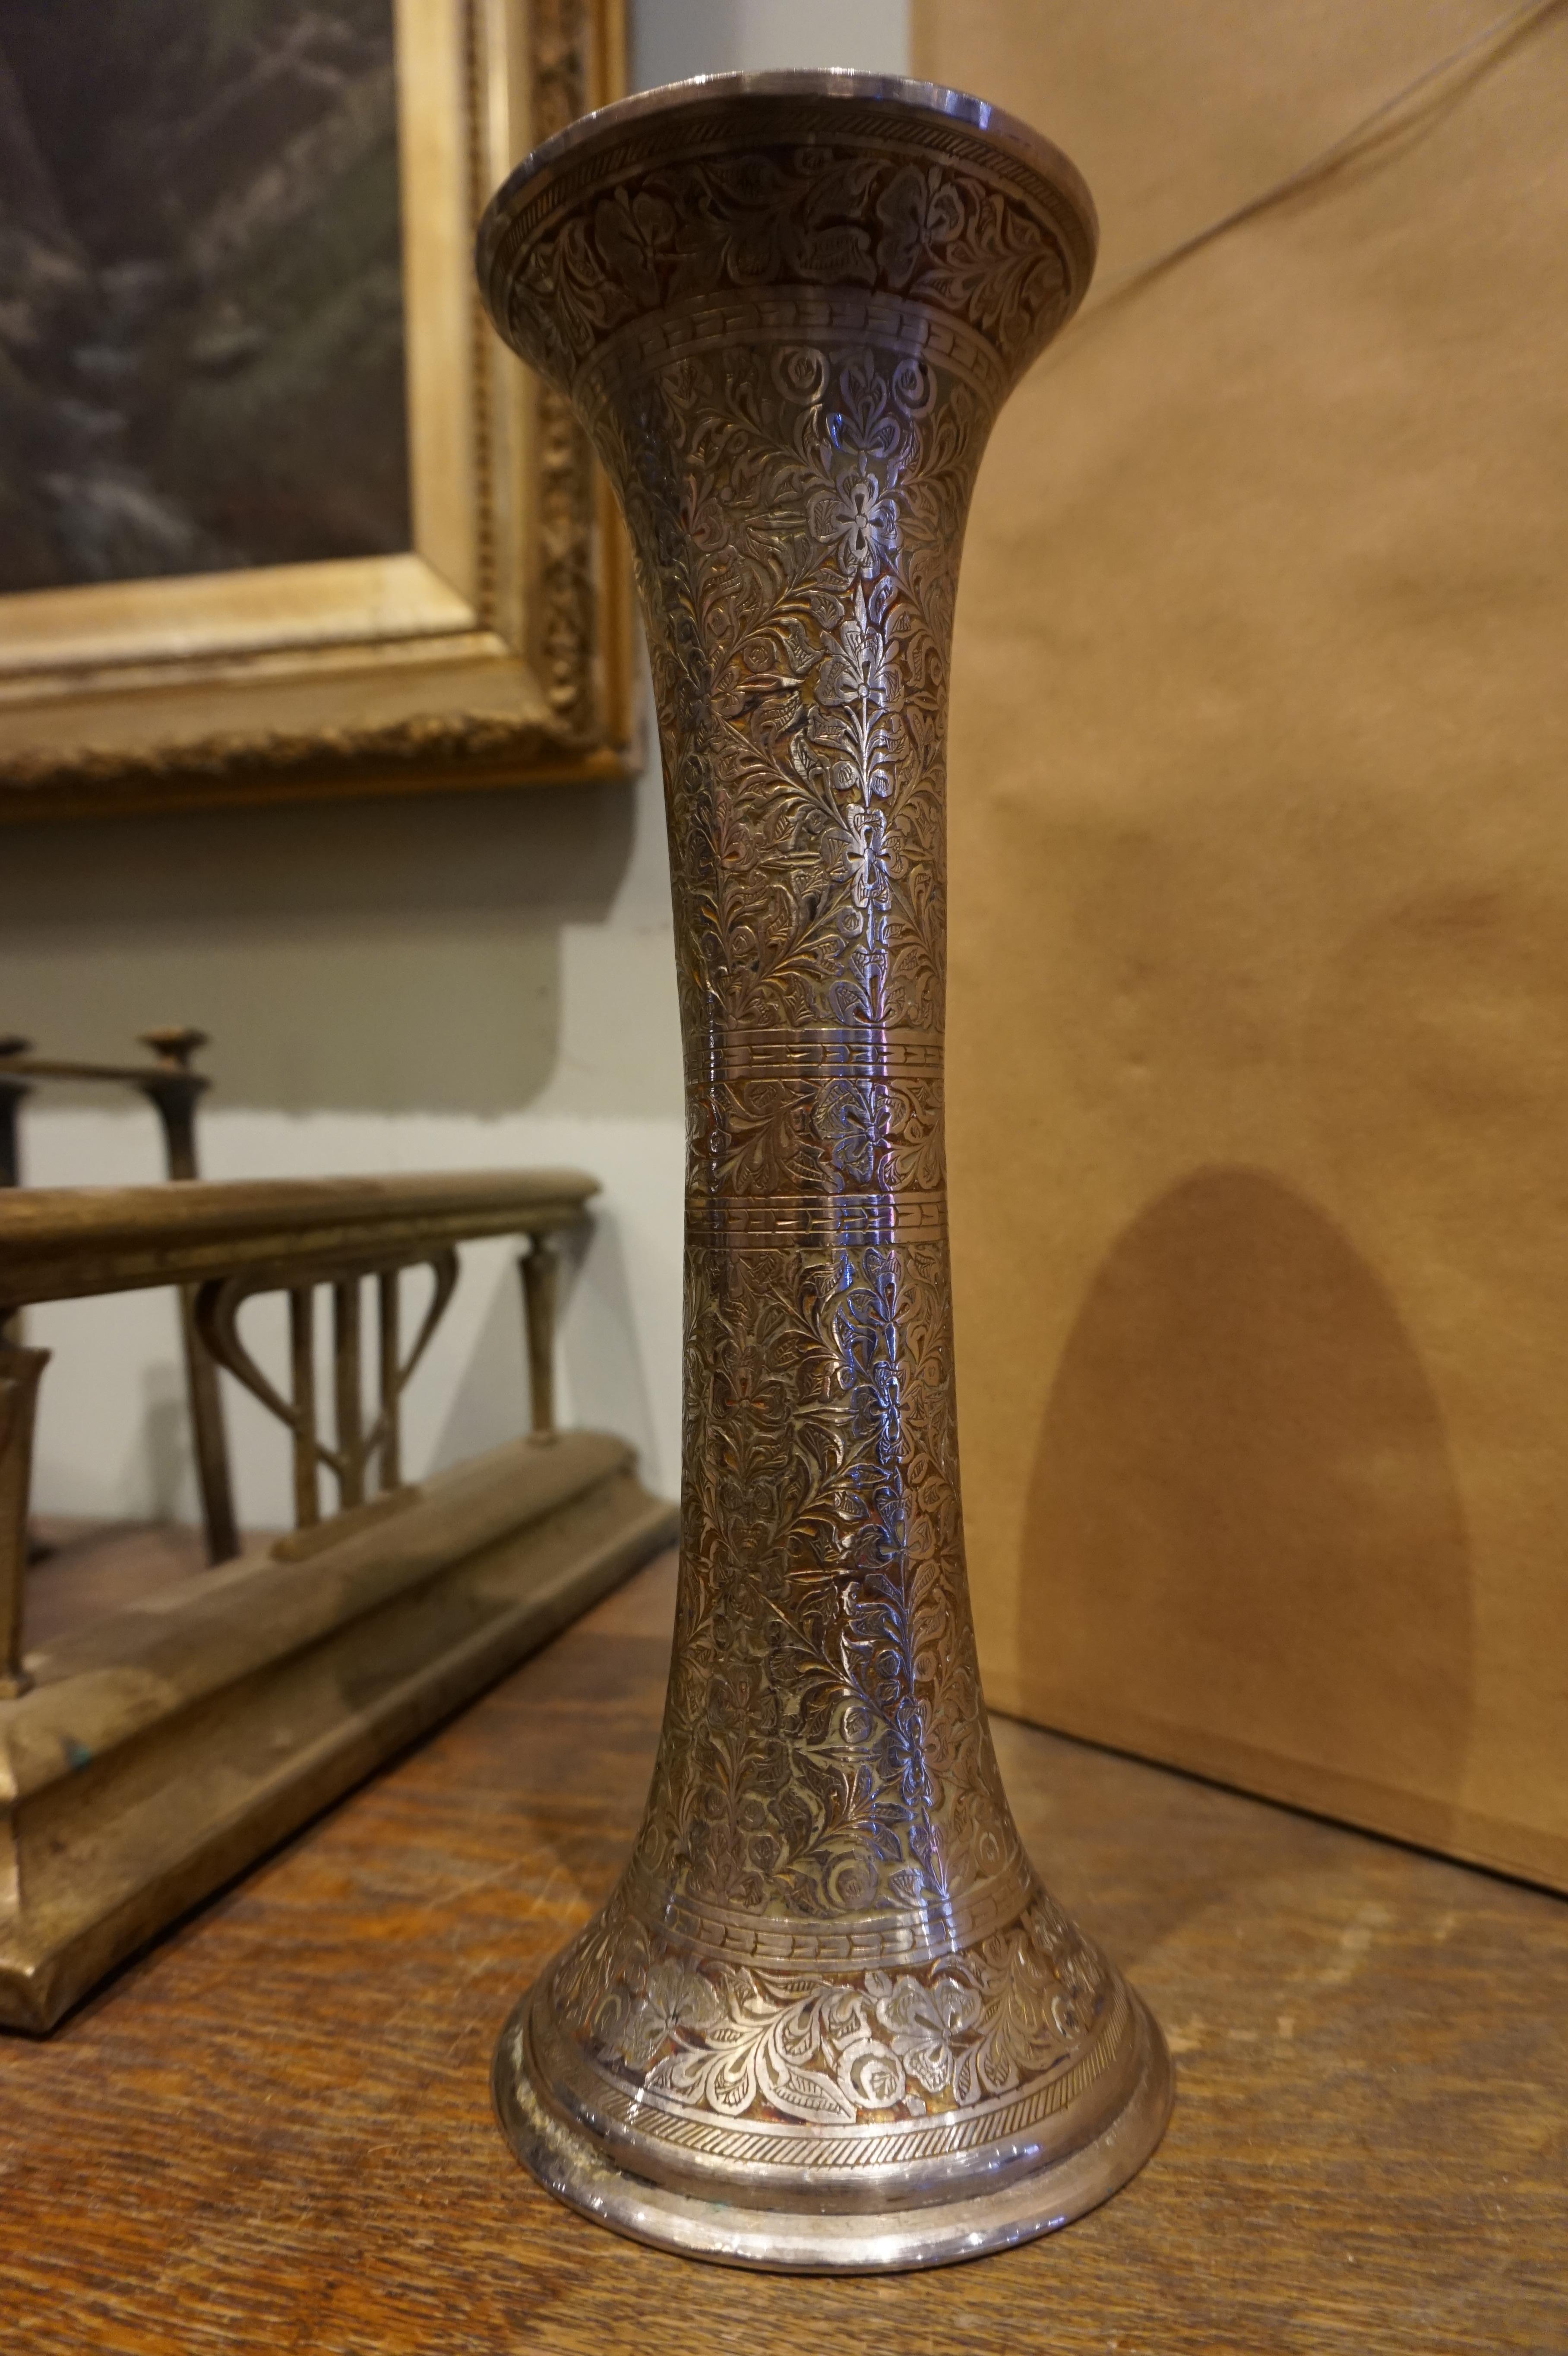 Very fine hand engraved and painted silver plated British India export vase with excellent floral detail. Cylindrical hour glass shape is unique. One foot height. High quality piece.